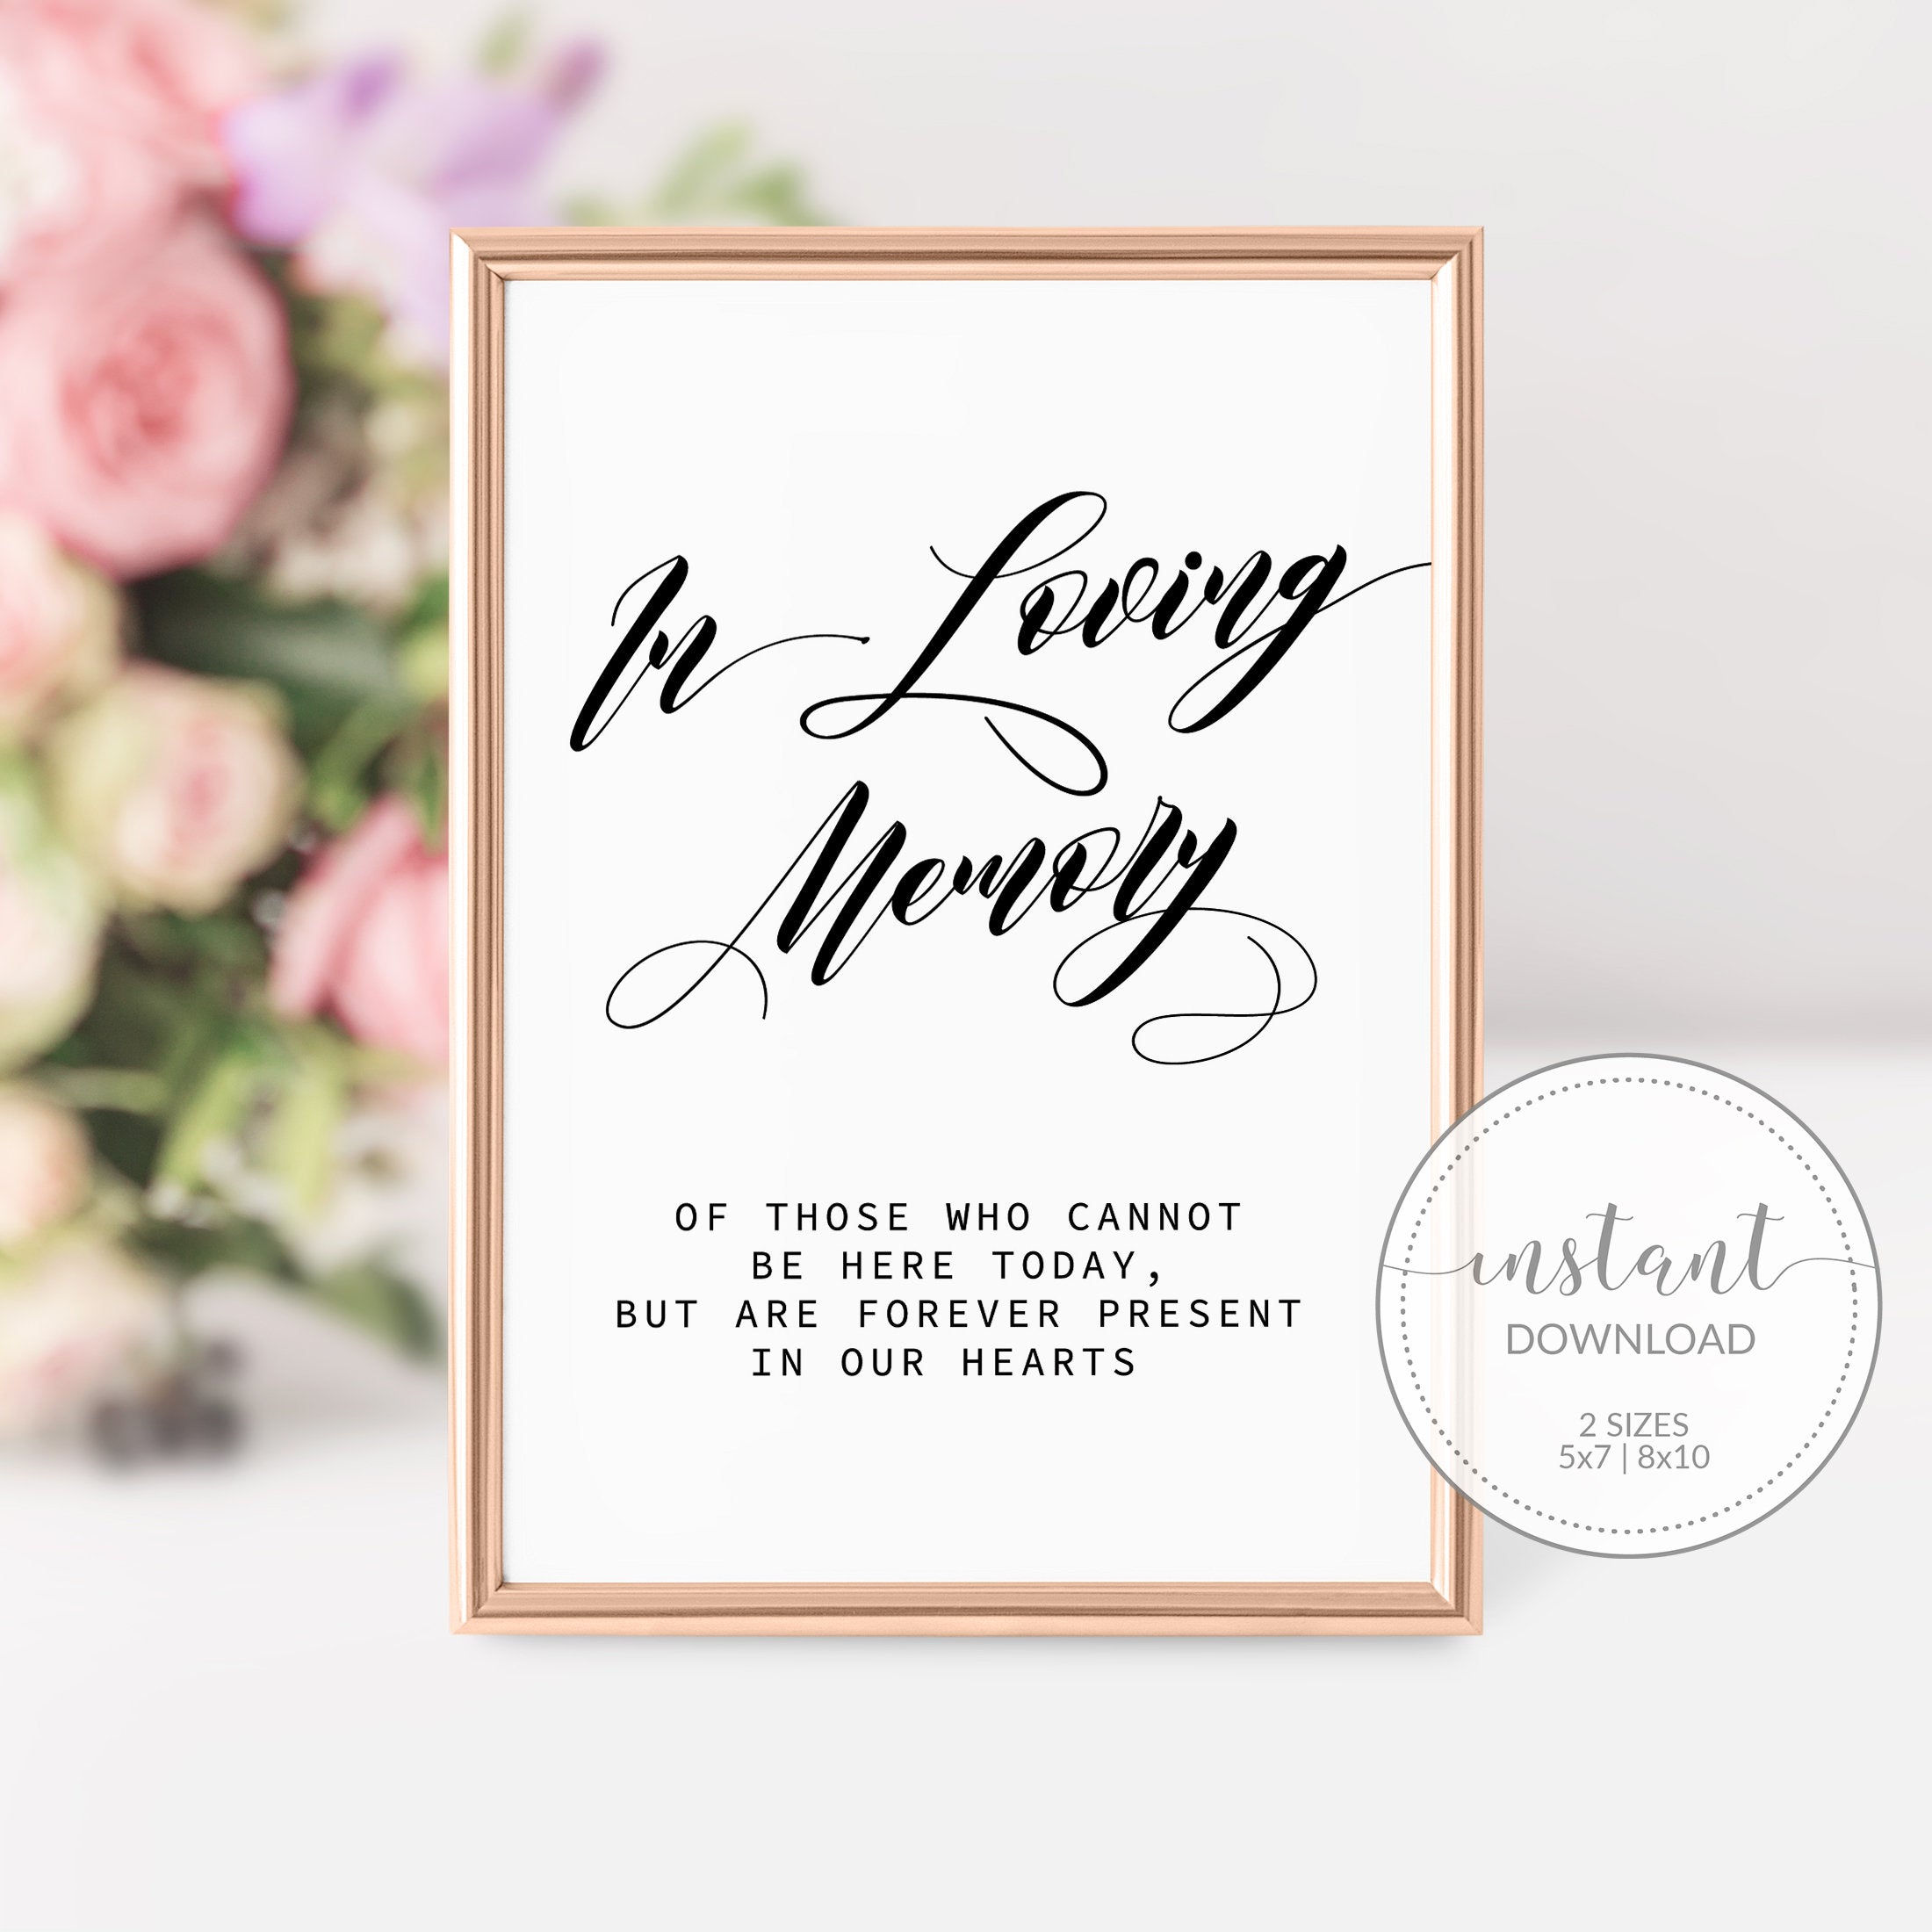 Wedding Memorial Sign, In Loving Memory Wedding Sign Printable, Memorial Table Sign, Remembrance Sign Wedding, INSTANT DOWNLOAD - SFB100 - @PlumPolkaDot 